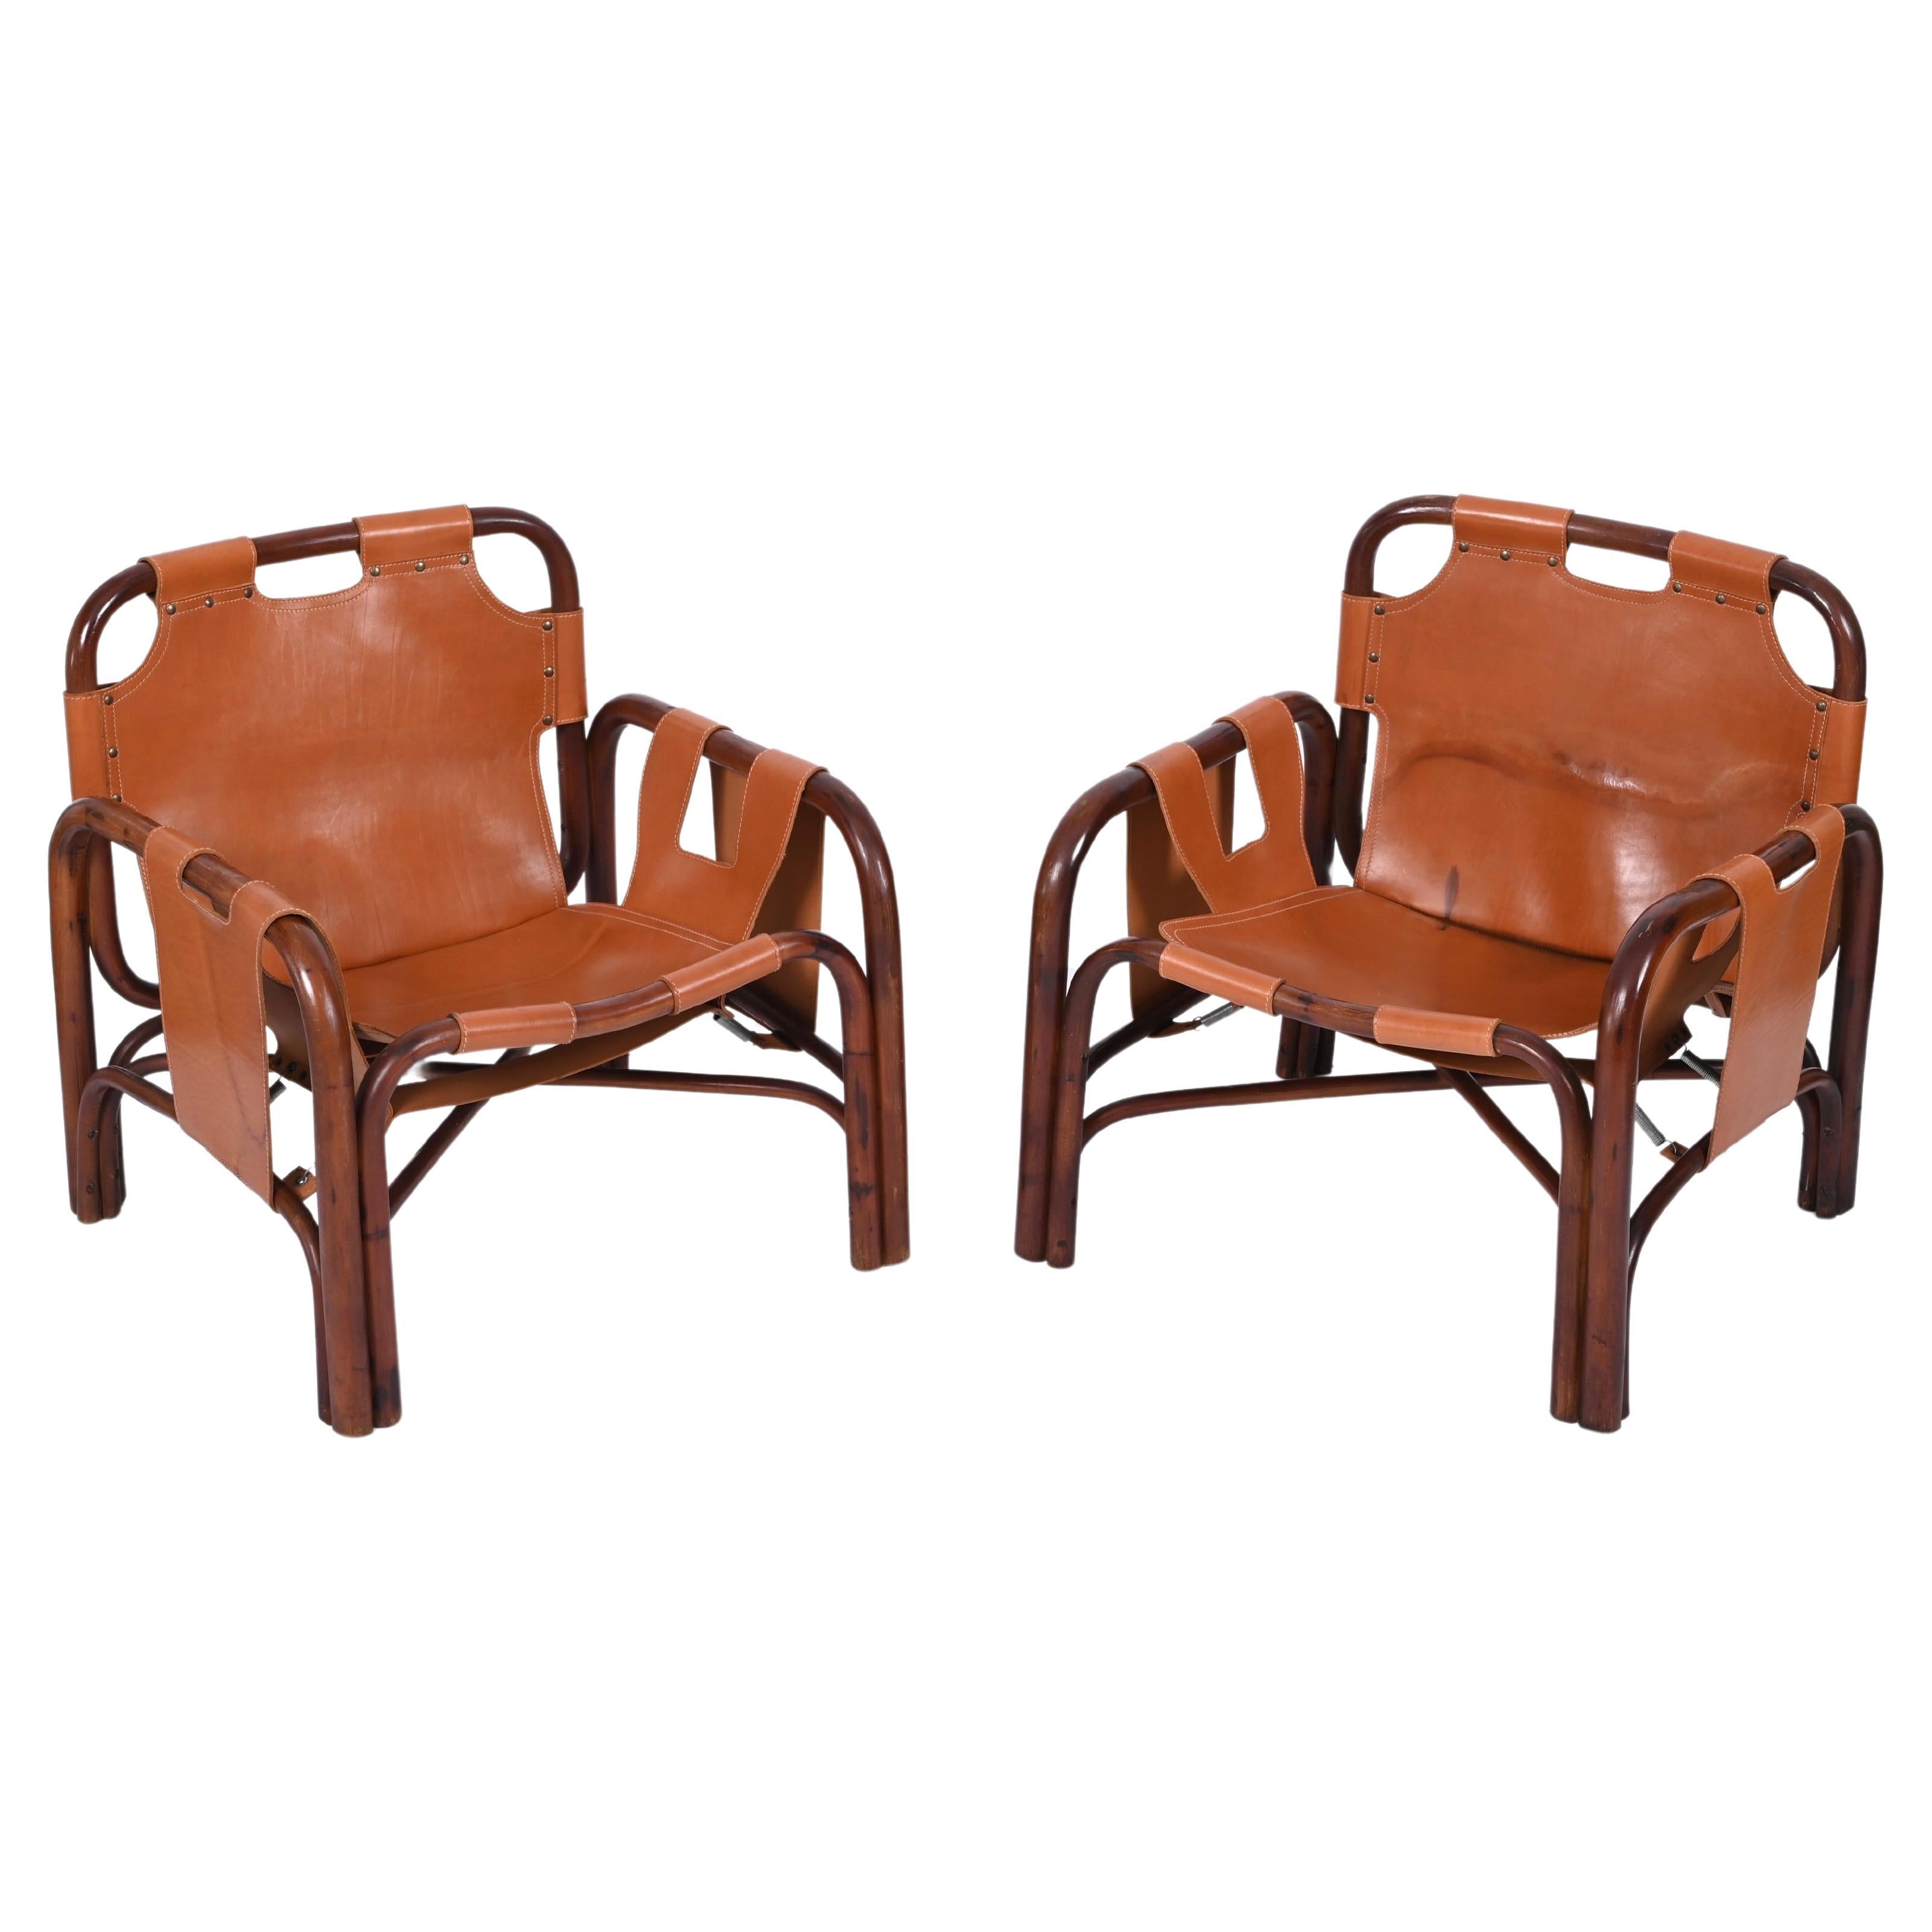 Pair of "Safari" Armchairs in Rattan and Leather by Tito Agnoli, Italy 1960s For Sale